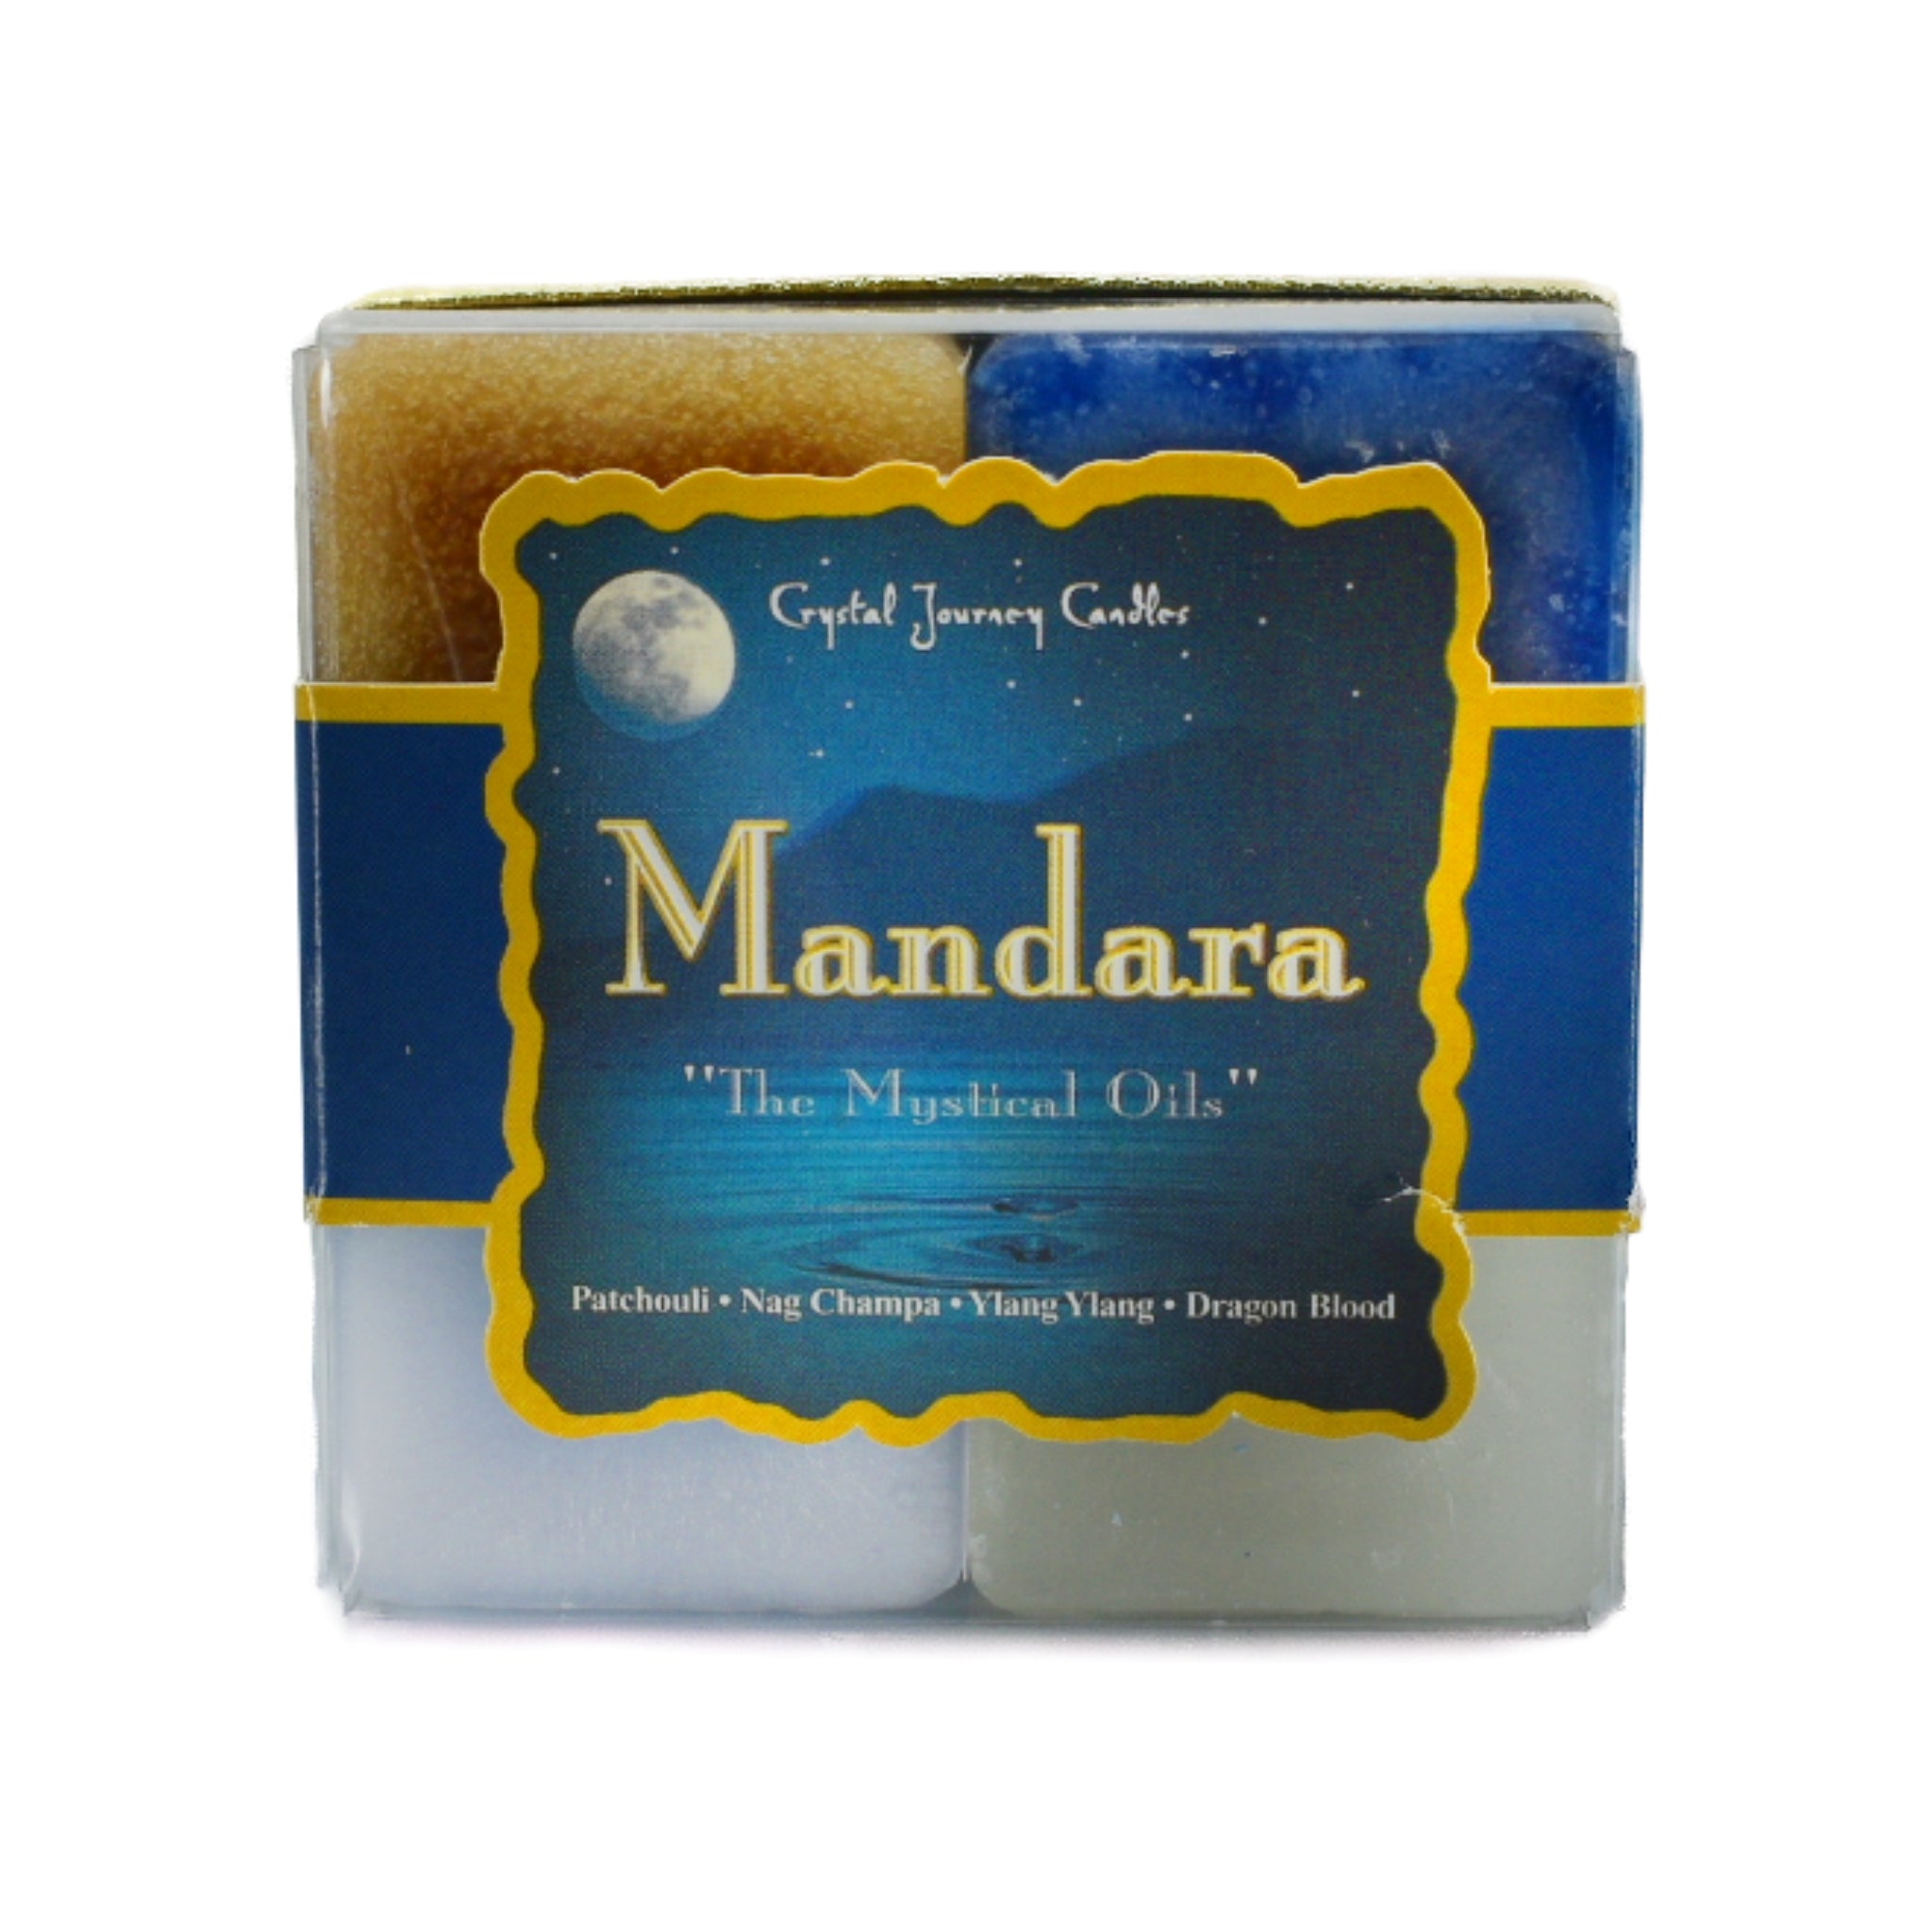 Mandara Square Pack Candle.  Candle scented with "The Mystical Oils" patchouli, nag champa, slang slang, and mystical dragon's blood.  These plans are celebrated for their magical properties that many believe they possess.  The plants a celebrated for their sensory qualities.  